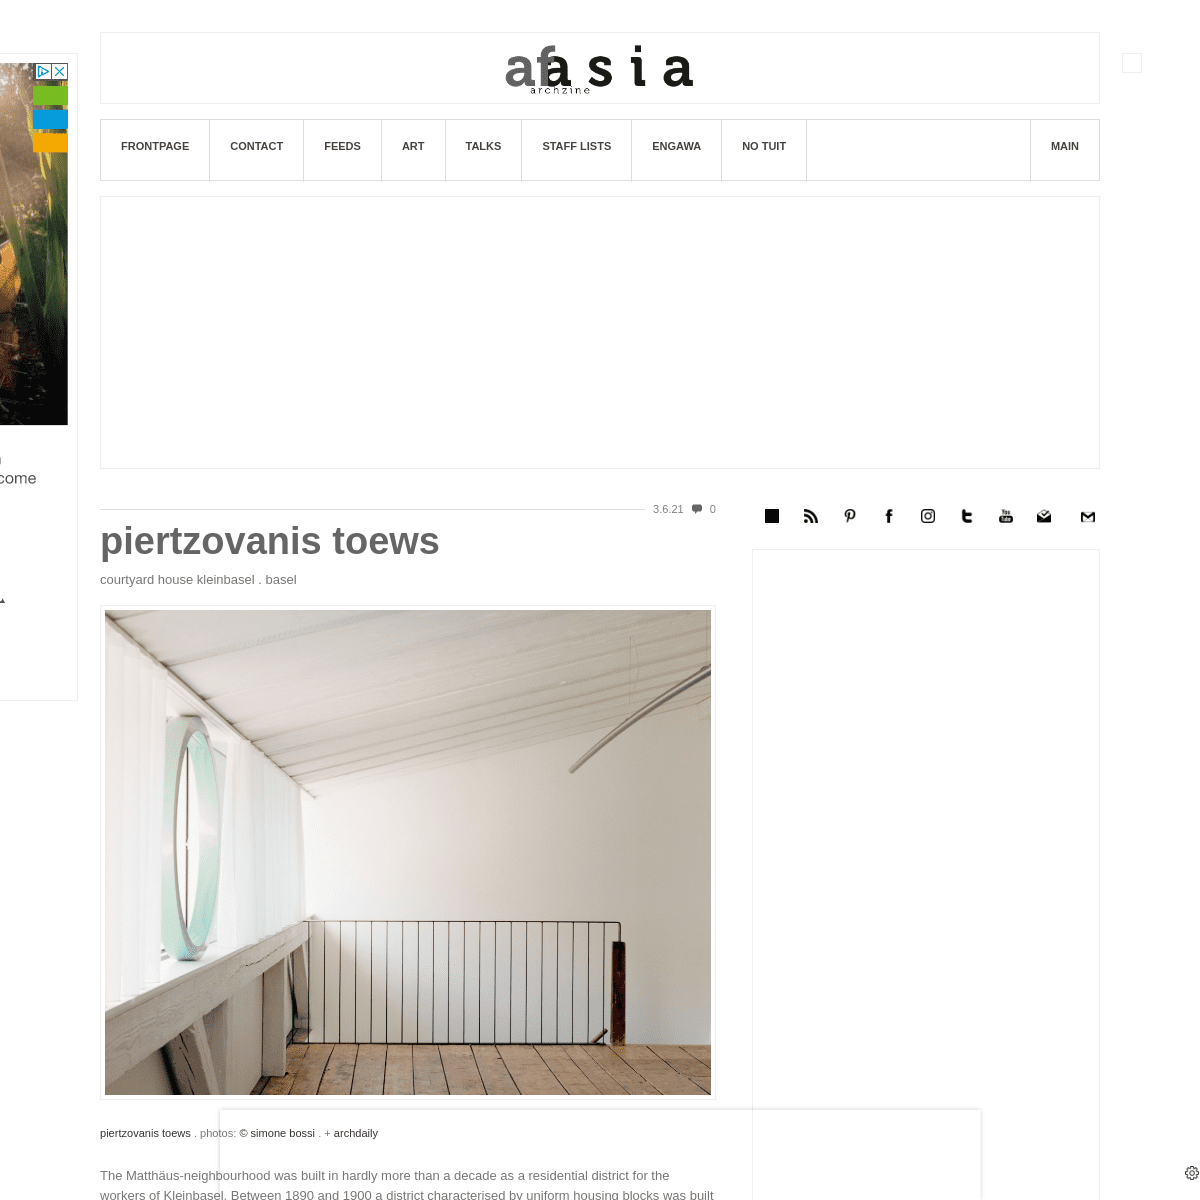 A complete backup of https://afasiaarchzine.com